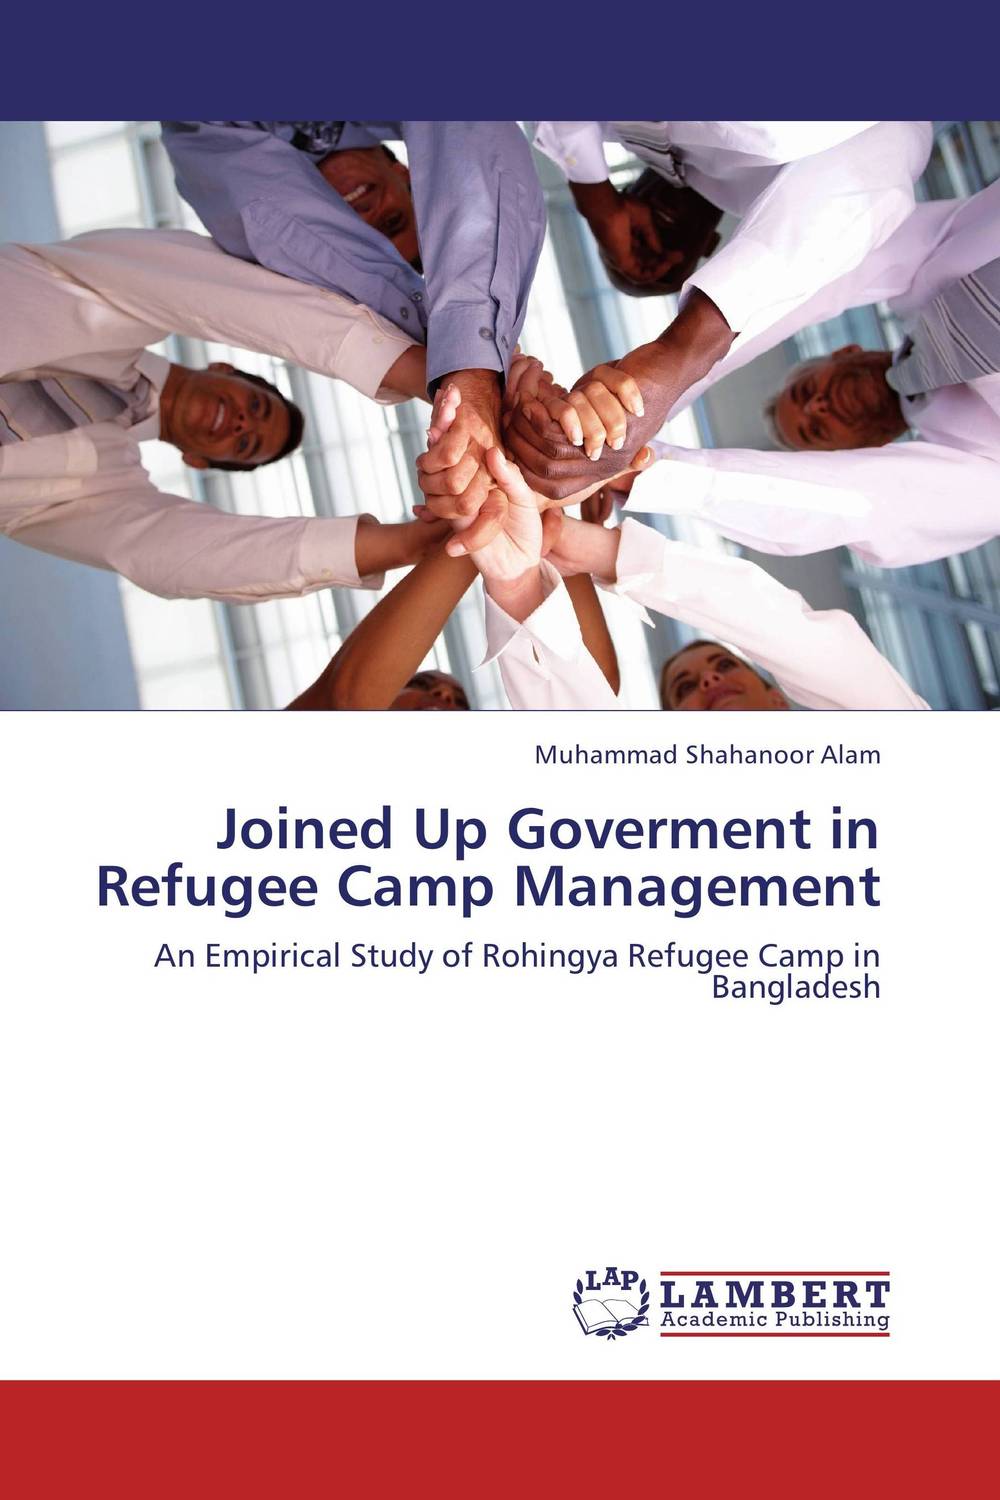 Joined Up Goverment in Refugee Camp Management